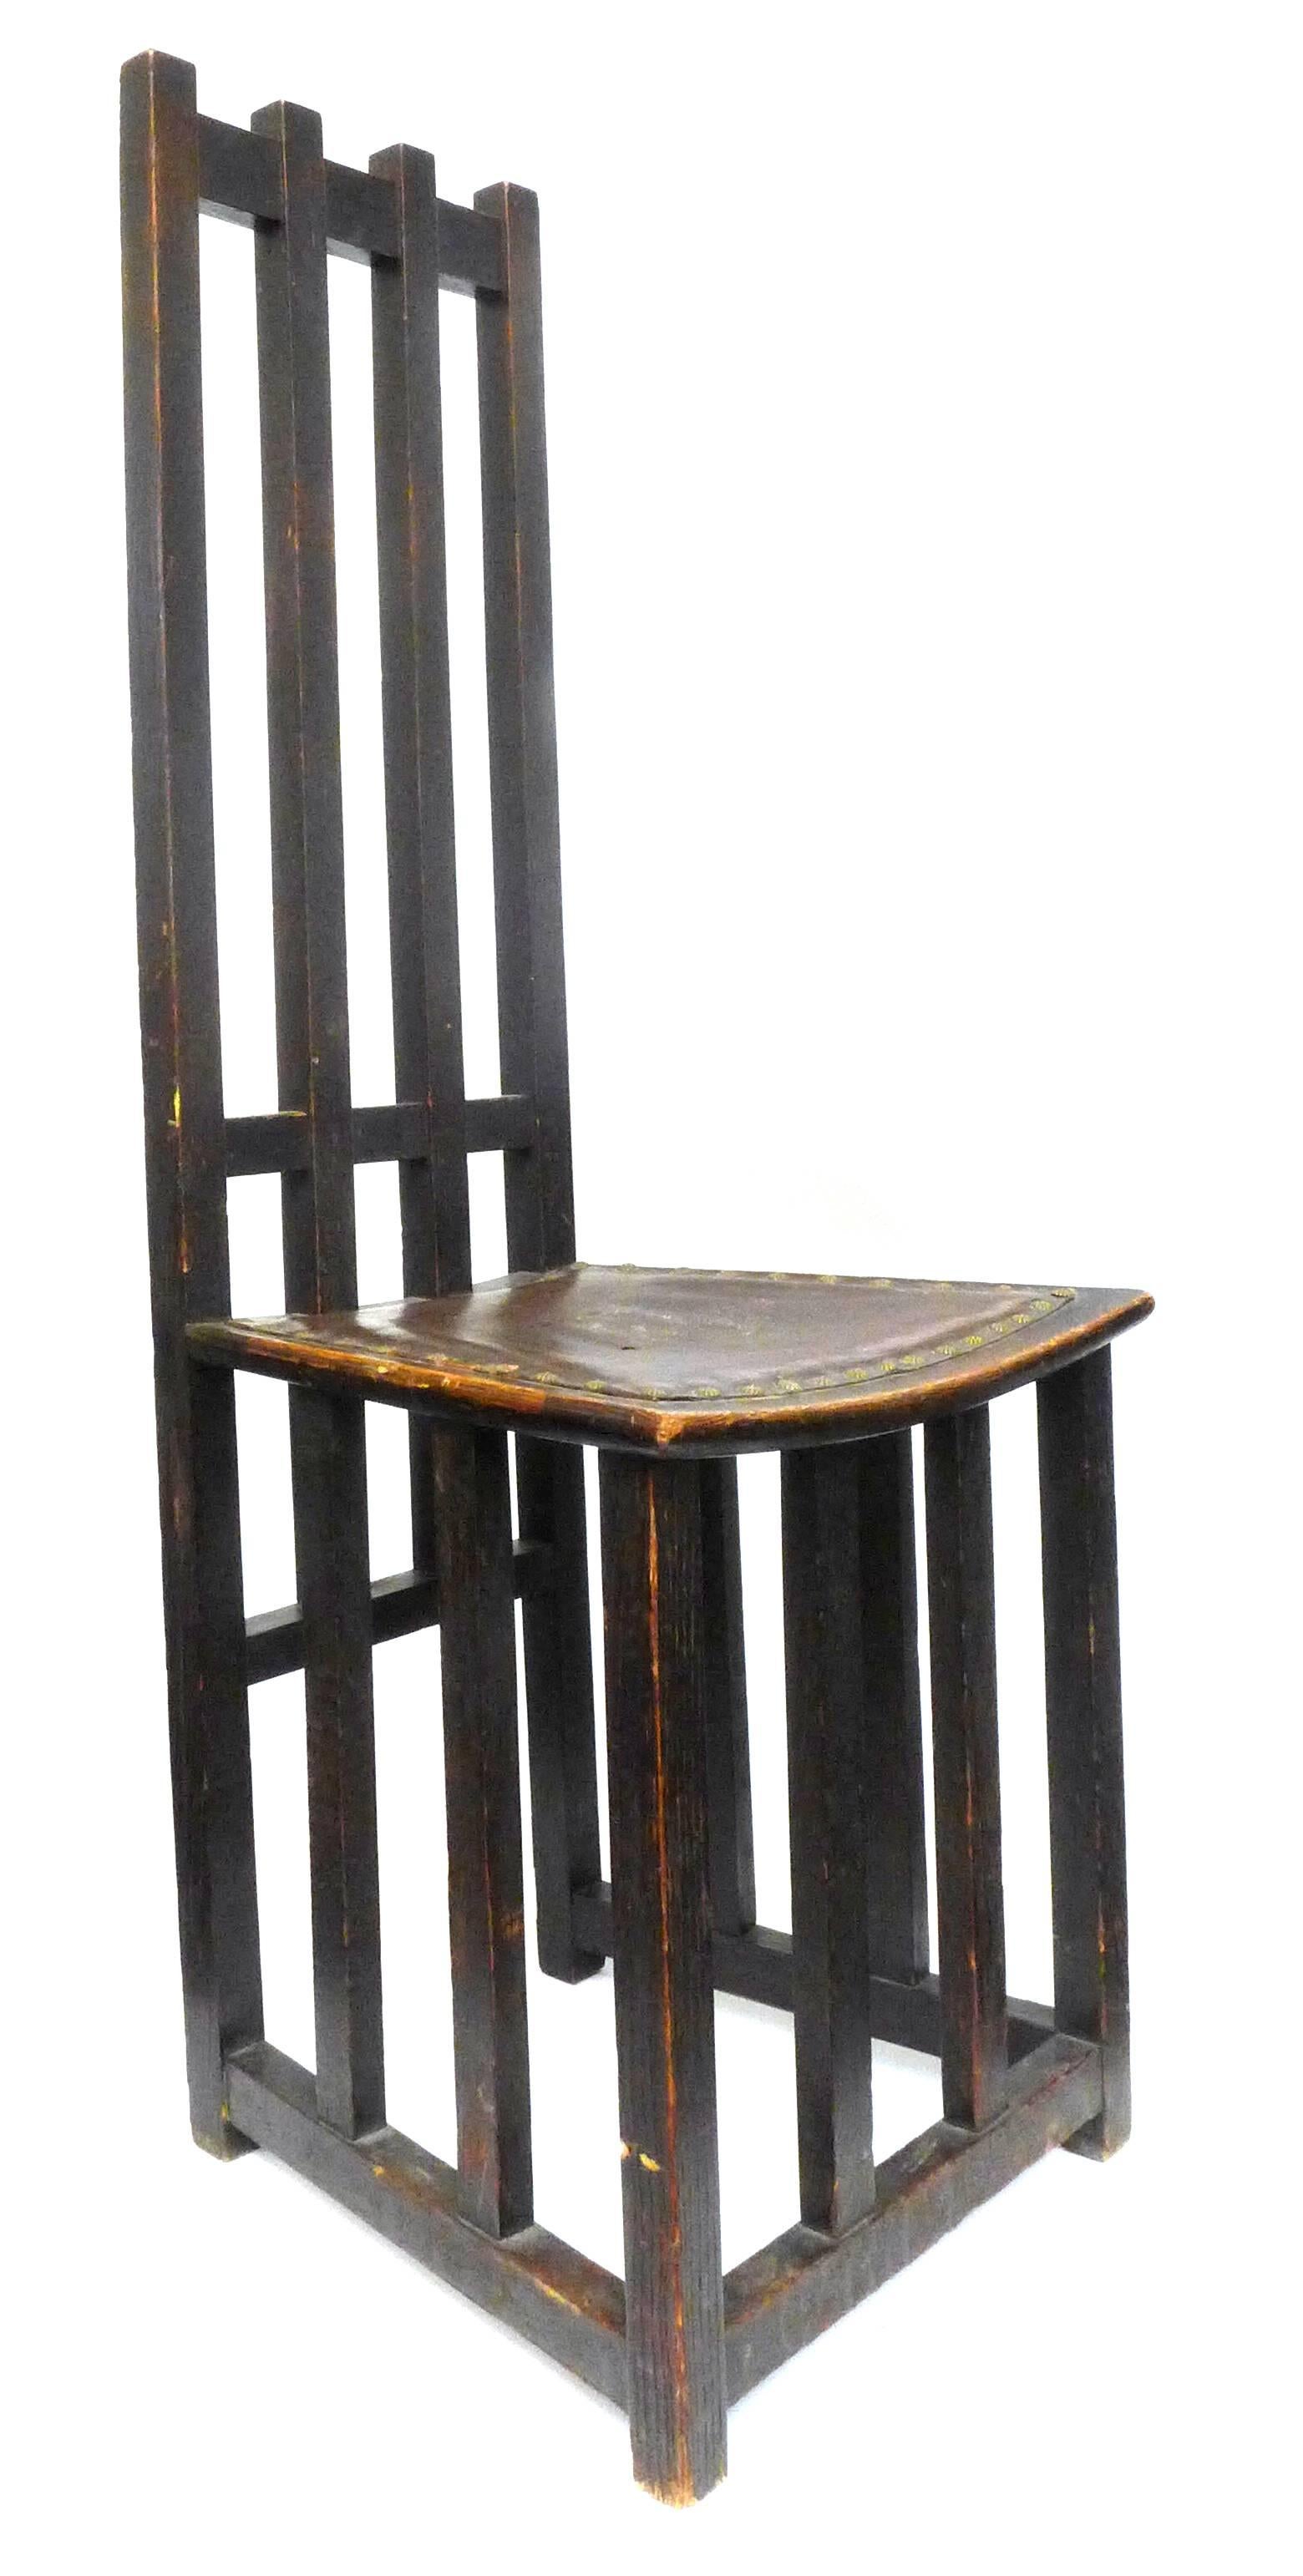 A wonderful, wood Arts & Craft high back chair. An austere yet alluringly artful, architectural article, thoughtfully designed and expertly mortise-and-tenon constructed. Minimalist and very modern with captivating repeating lines and a rectilinear